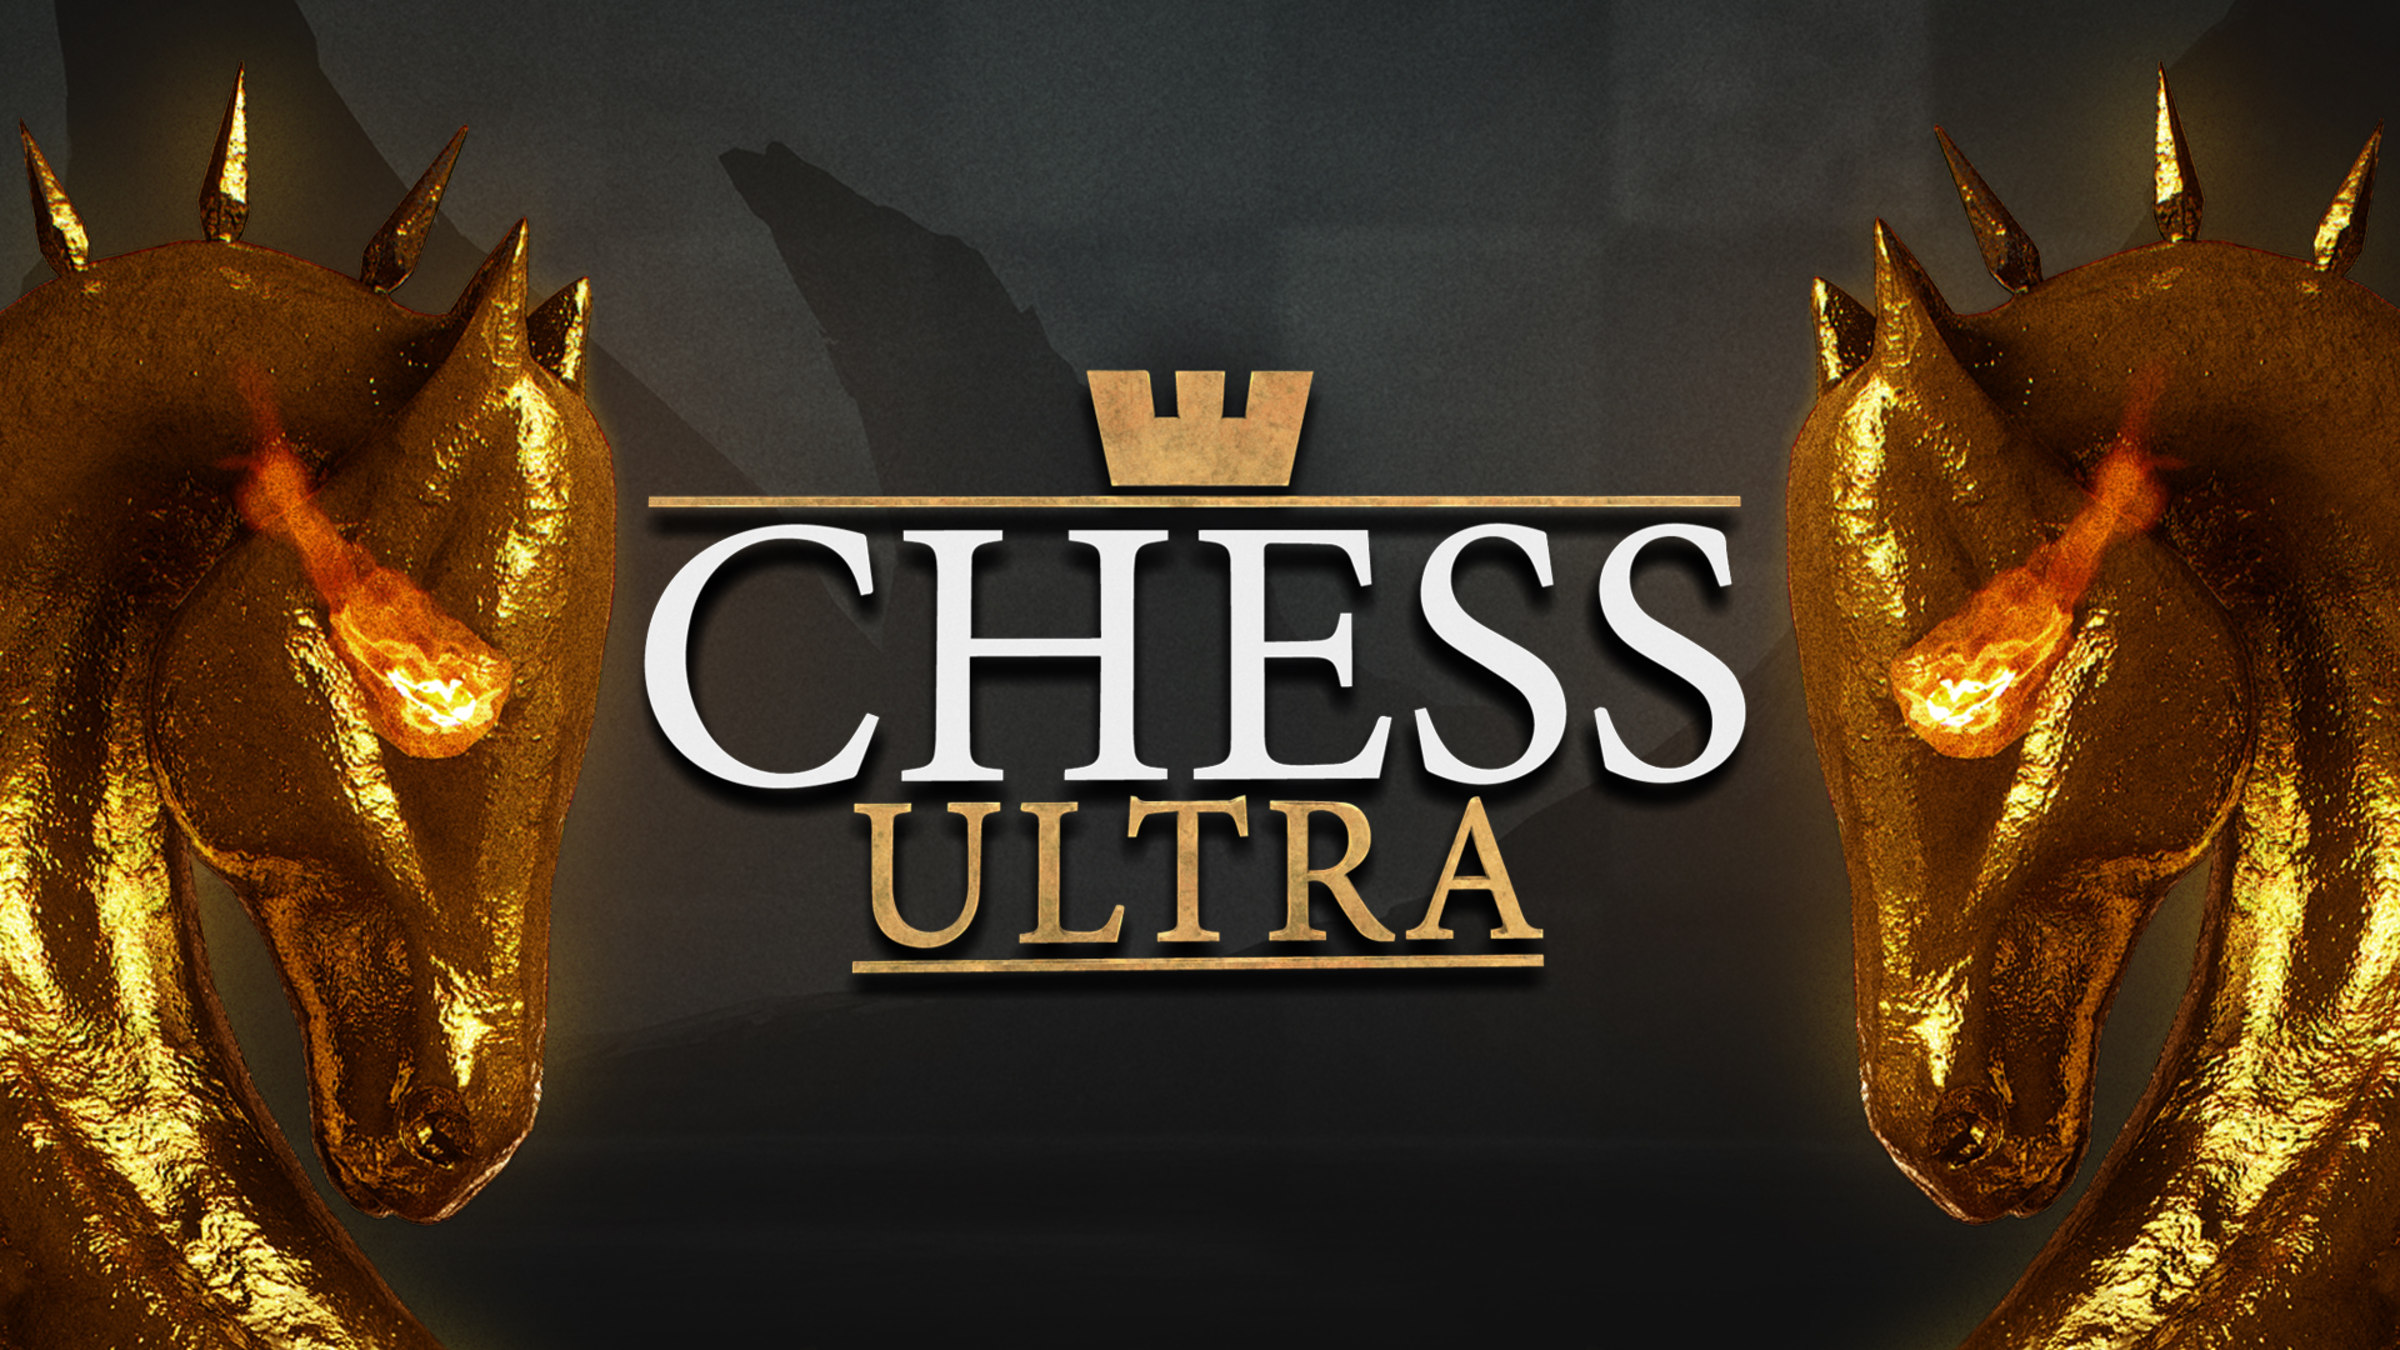 Chess Ultra, PC Steam Game